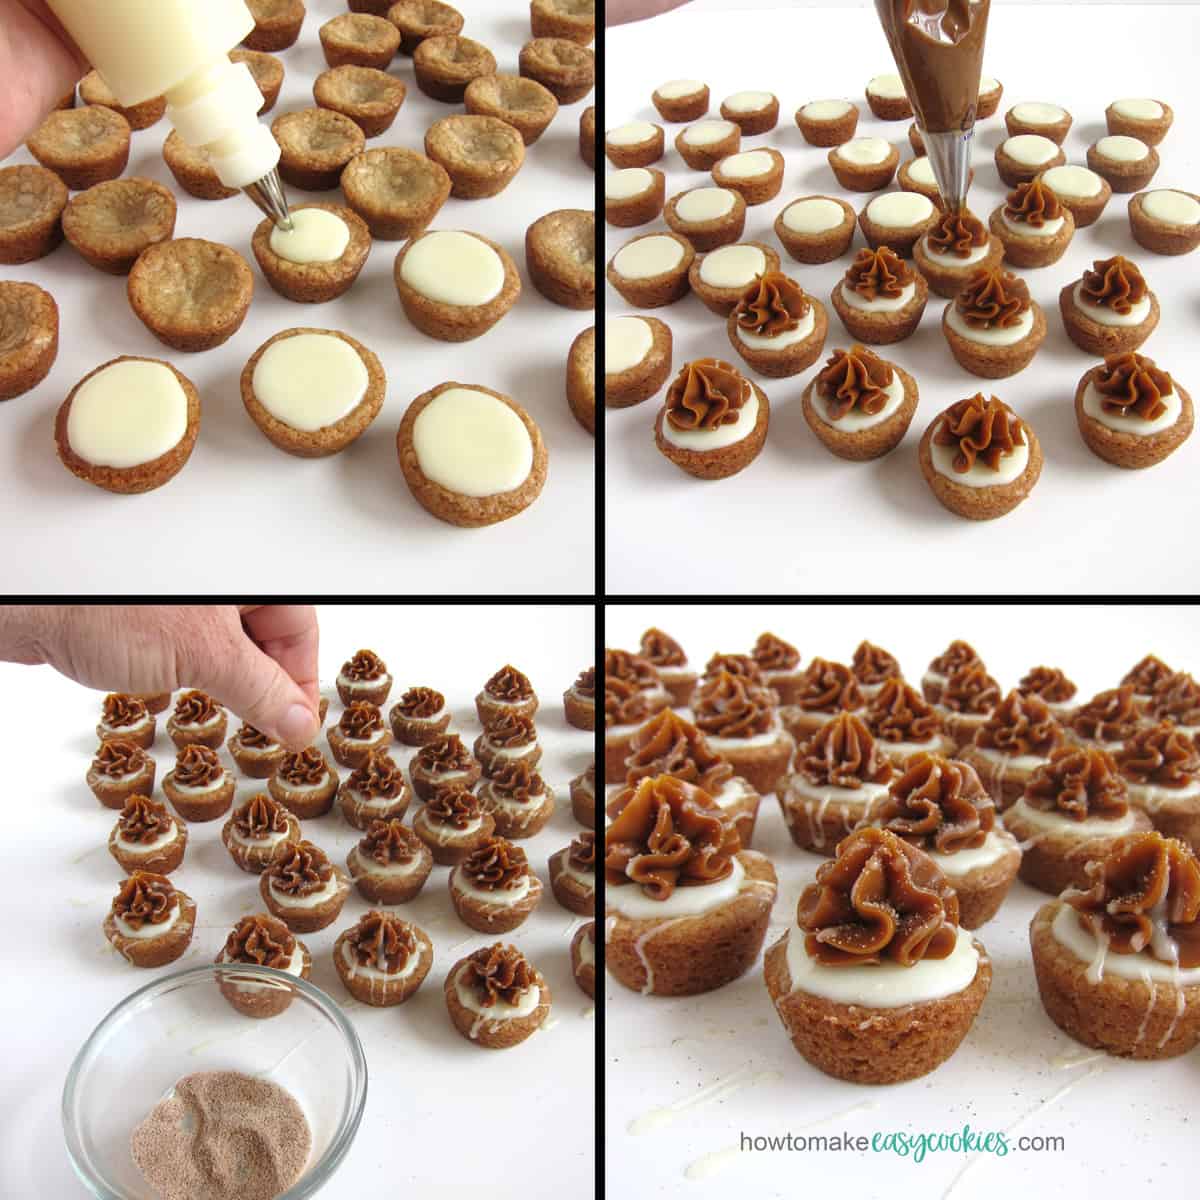 pipe white chocolate ganache and Dulce de Leche caramel over snickerdoodle cookies then sprinkle with cinnamon